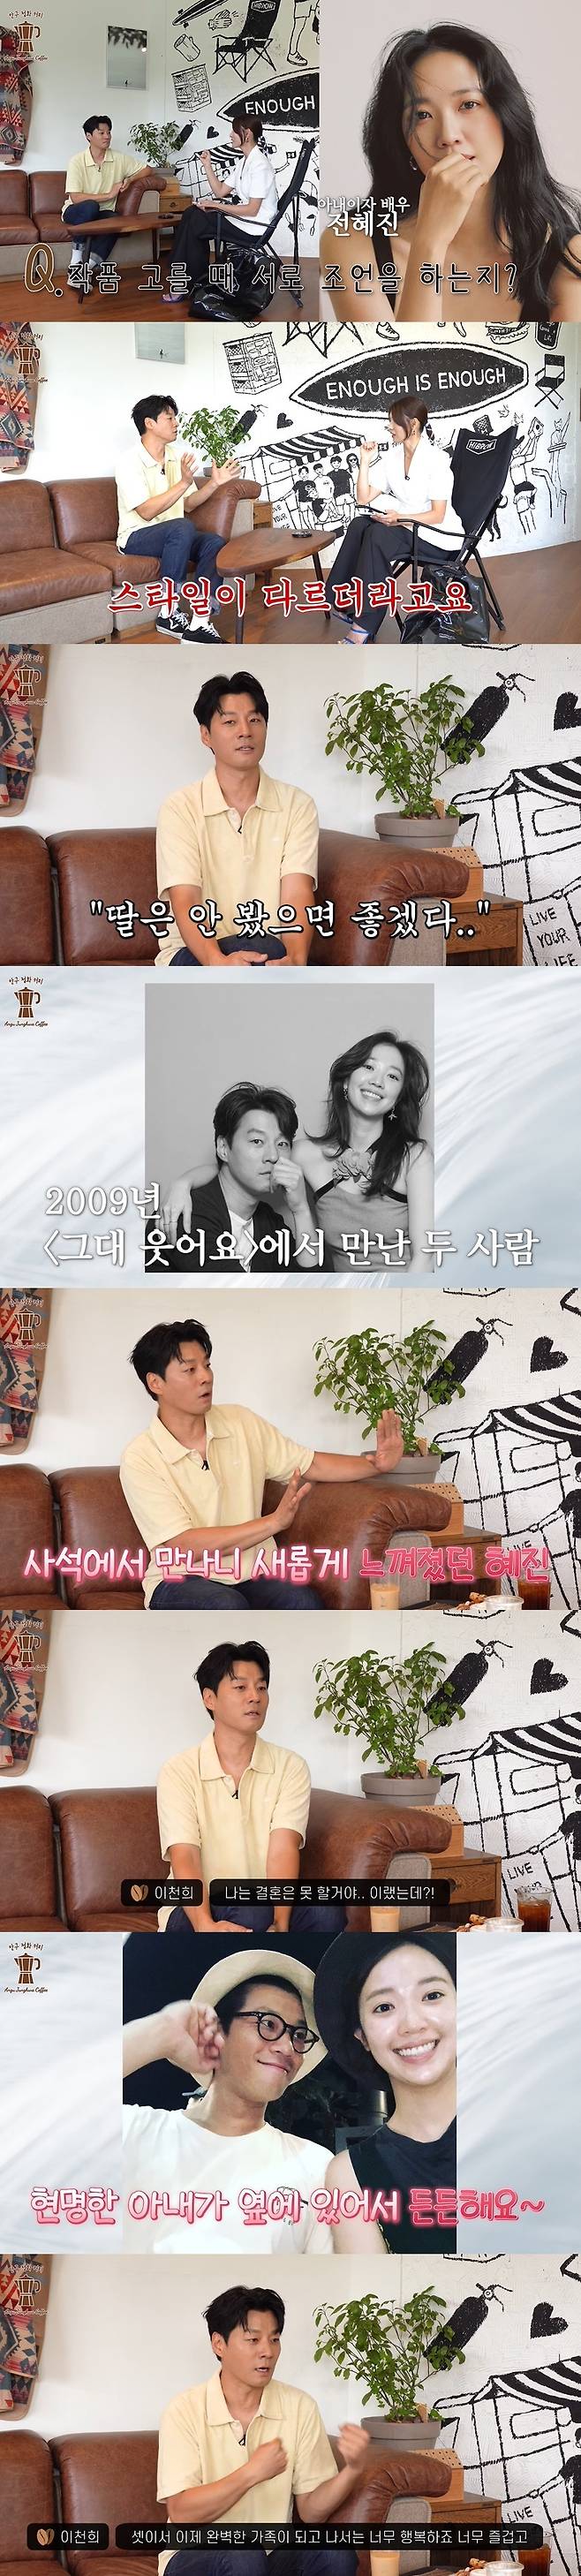 Actor Lee Chun-hee has revealed his love for wife Hye-Jin Jeon and has spoken of their happy marriage.Lee Chun-hee appeared on Kim Jung-hwas Zheng He coffee shop channel, which was unveiled on August 30th.In the video, Kim Jung-hwa visited a store run by Lee Chun-hee in Yangpyeong, Gyeonggi Province, where they met as a divorced couple in the past.While talking about Lee Chun-hees latest work,  ⁇ Pale Moon ⁇ , Kim Jung-hwa asked if he and his wife, Hye-Jin Jeon, would advise each other when choosing a piece.Lee Chun-hee said, In the past, I had advice for each other. I asked if I had any questions and tried to get advice from each other, but the style was different. The way I created the character was different.After knowing the different points, I told them to look at the results.When asked what he thought of Pale Moon, Lee Chun-hee replied, I couldnt rehearse the script at home. The lines were so bad. In the past, the child adjusted all the lines more than his wife.Pale Moon said he couldnt even watch the script.Lee Chun-hee and Hye-Jin Jeon met in the 2009 drama  ⁇   ⁇   ⁇   ⁇   ⁇   ⁇   ⁇ .Lee Chun-hee said, The director also said that he had connected him, but he never did.When the work was over, I had to call it HyeJin, but it was awkward and different in style, and it seemed like I met a new person there and it was awkward.Lee Chun-hee, who was married for about 10 months, said, At that time, I told everyone around me that I was dating, and I thought that I would not be able to get married because there were so many things I wanted to do.I am so happy now, he said. I feel so different now.He added, I used to see a bright and energetic figure, and now Im reassured that I have a wise wife next to me. I have a child as well as a wife, so I am very happy and happy after becoming a perfect family.